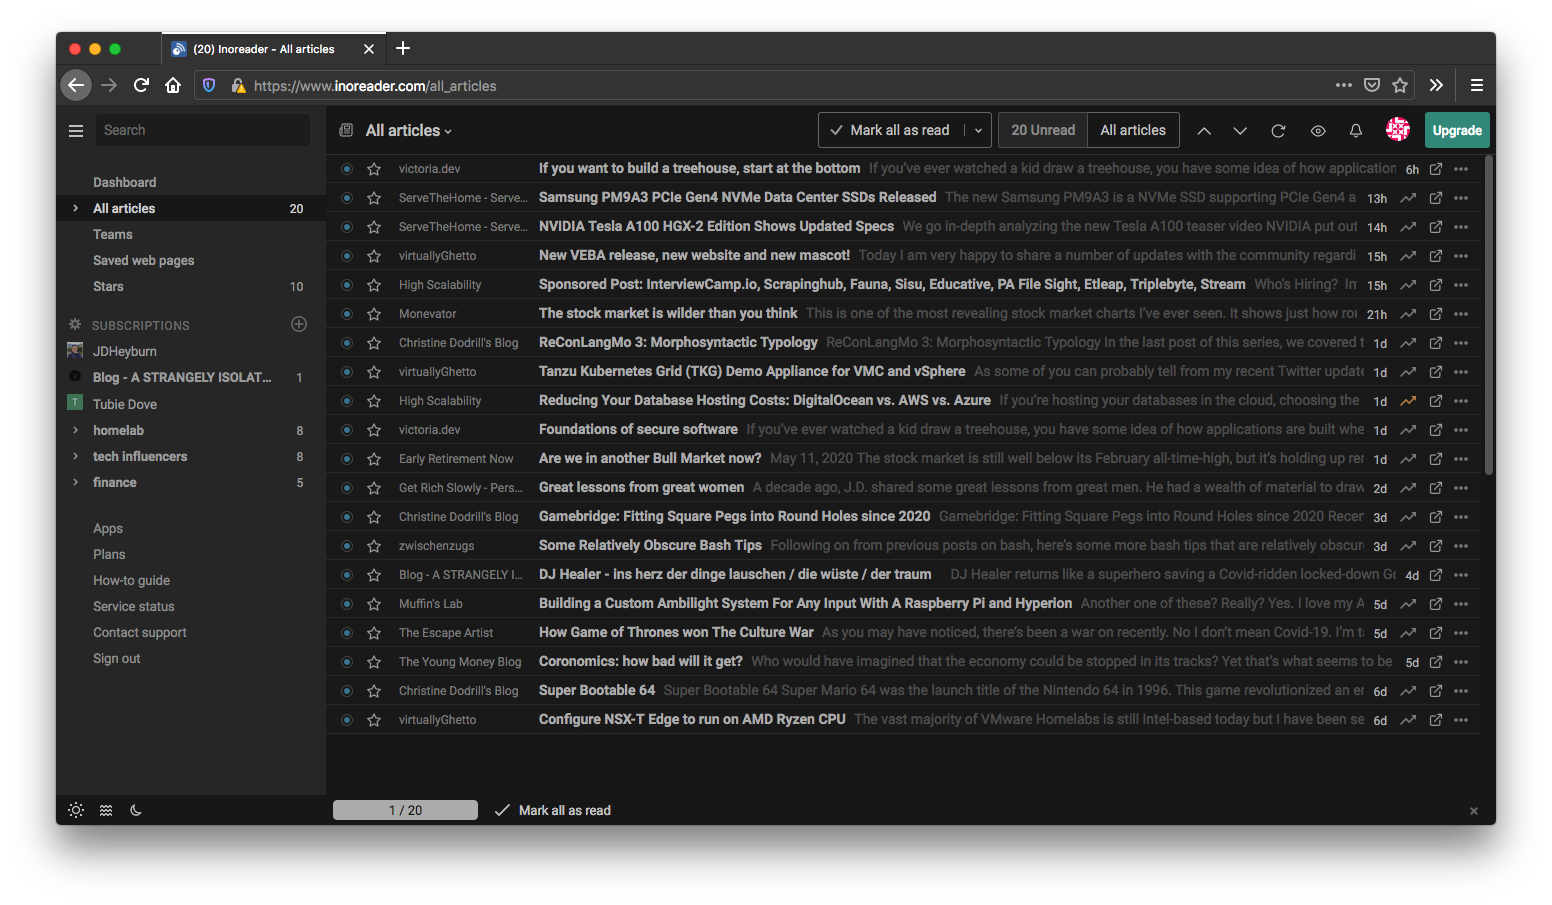 inoreader as an RSS feed aggregator